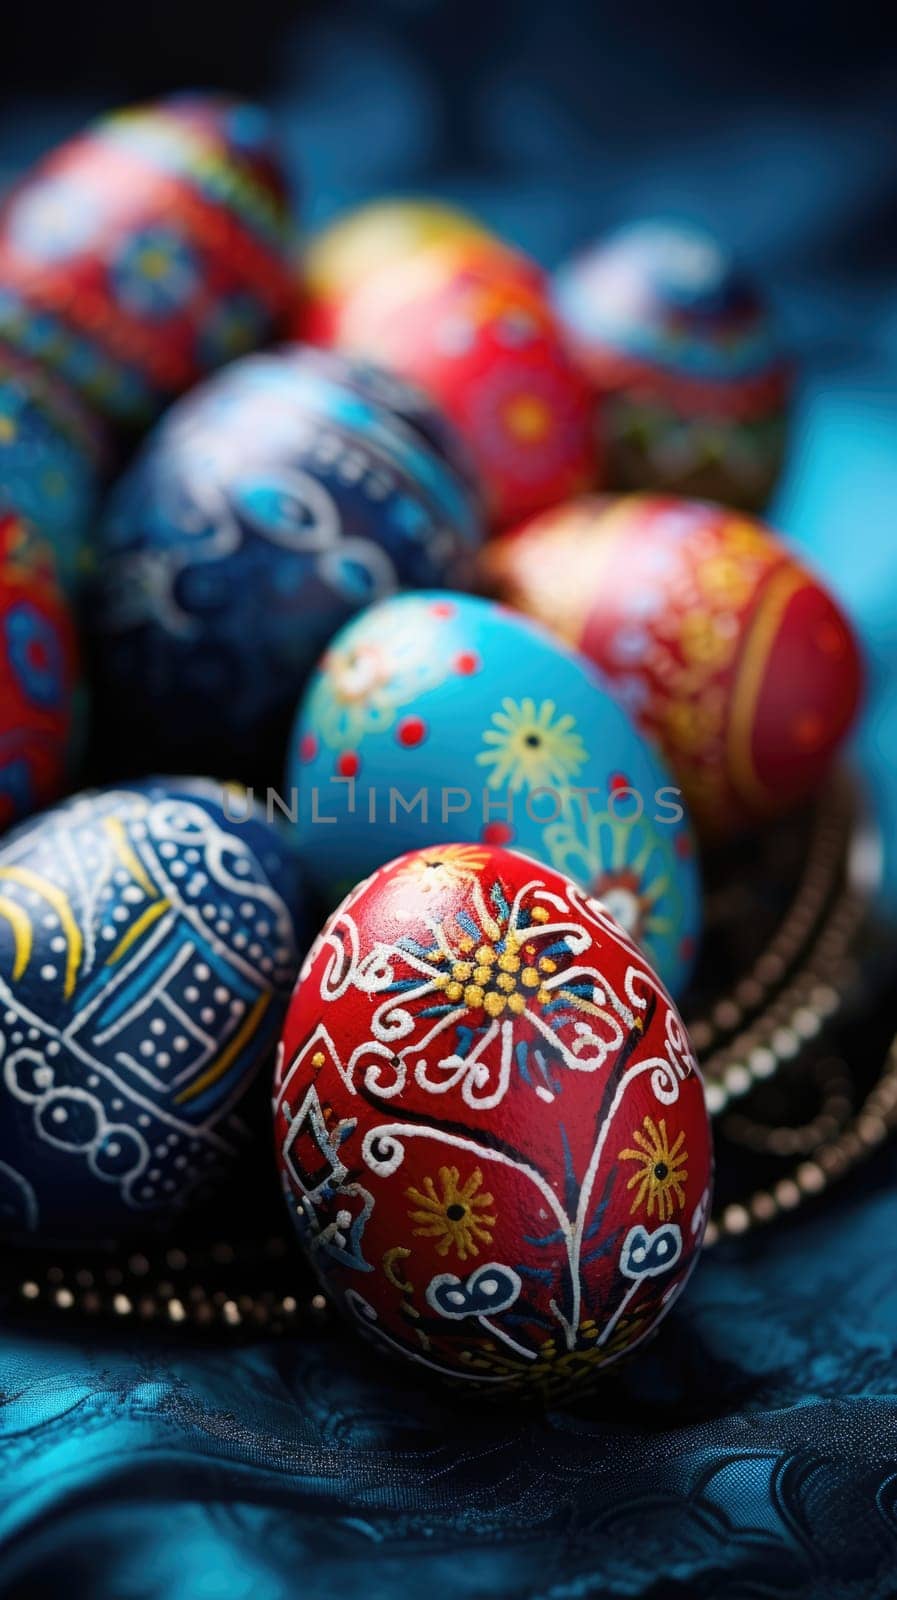 Easter eggs painted in blue color. Vertical holiday banner. AI